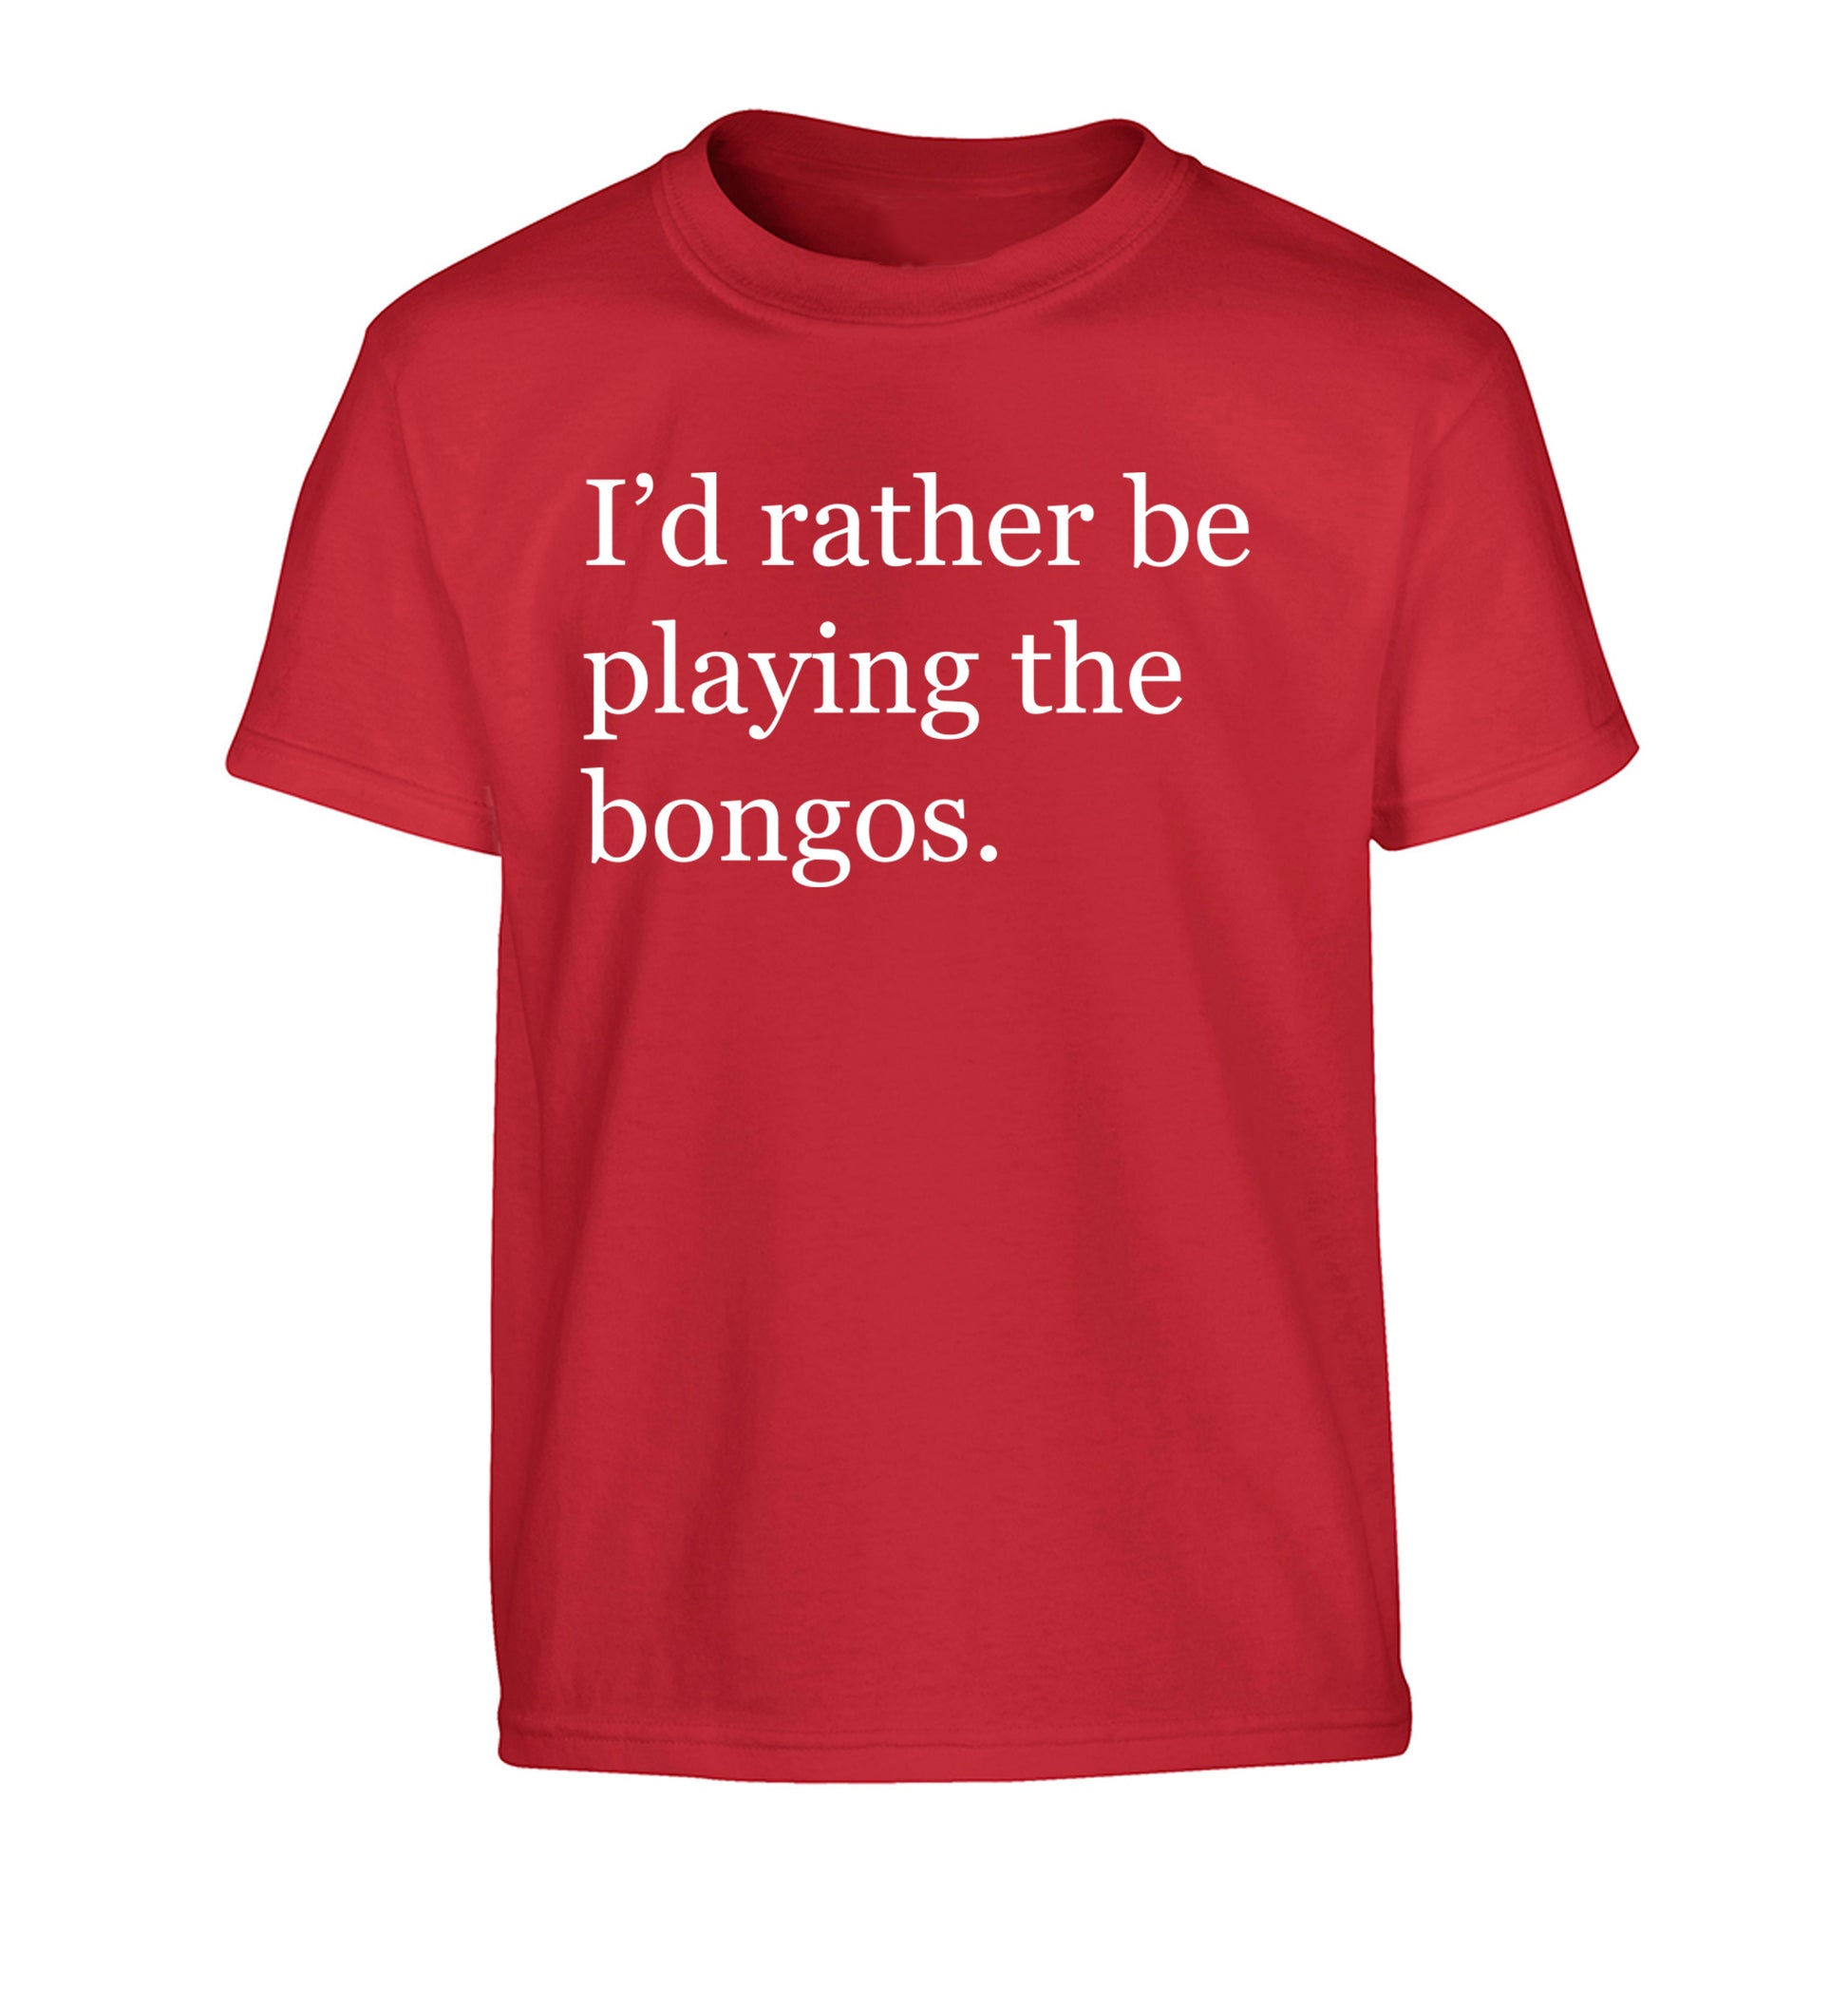 I'd rather be playing the bongos Children's red Tshirt 12-14 Years